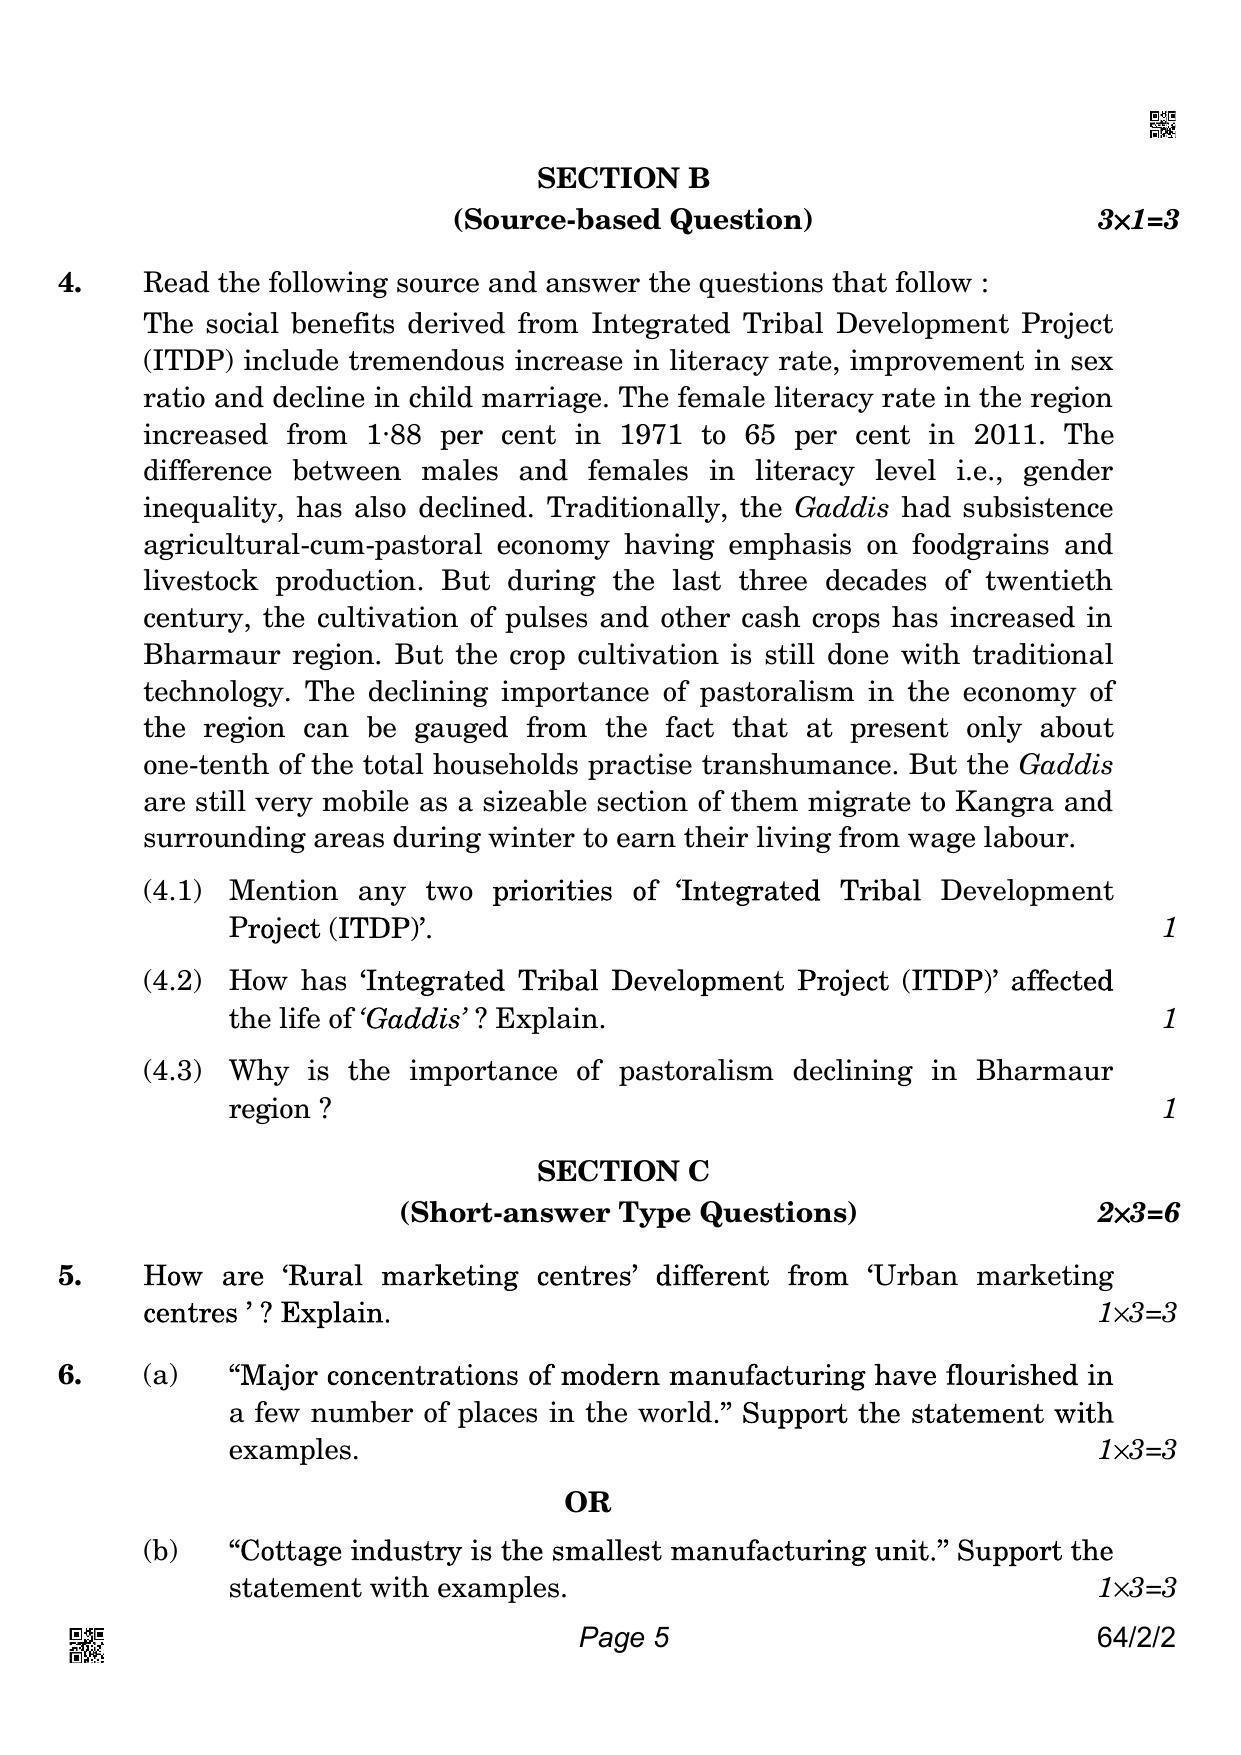 CBSE Class 12 64-2-2 Geography 2022 Question Paper - Page 5